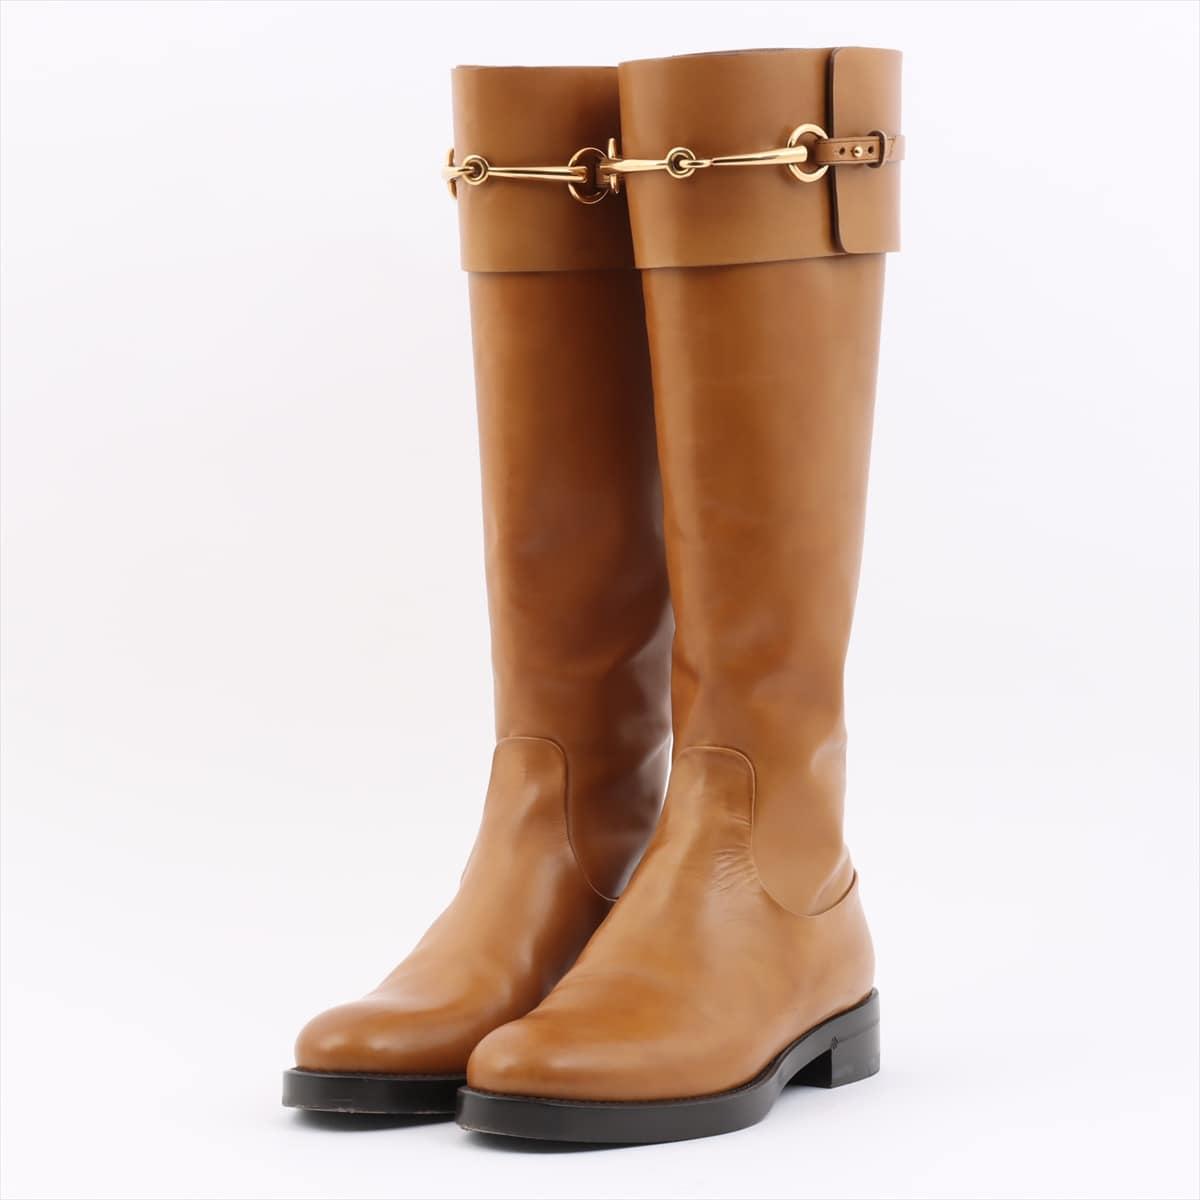 Gucci Horsebit Leather Long boots 36 Ladies' Brown with shoehorn